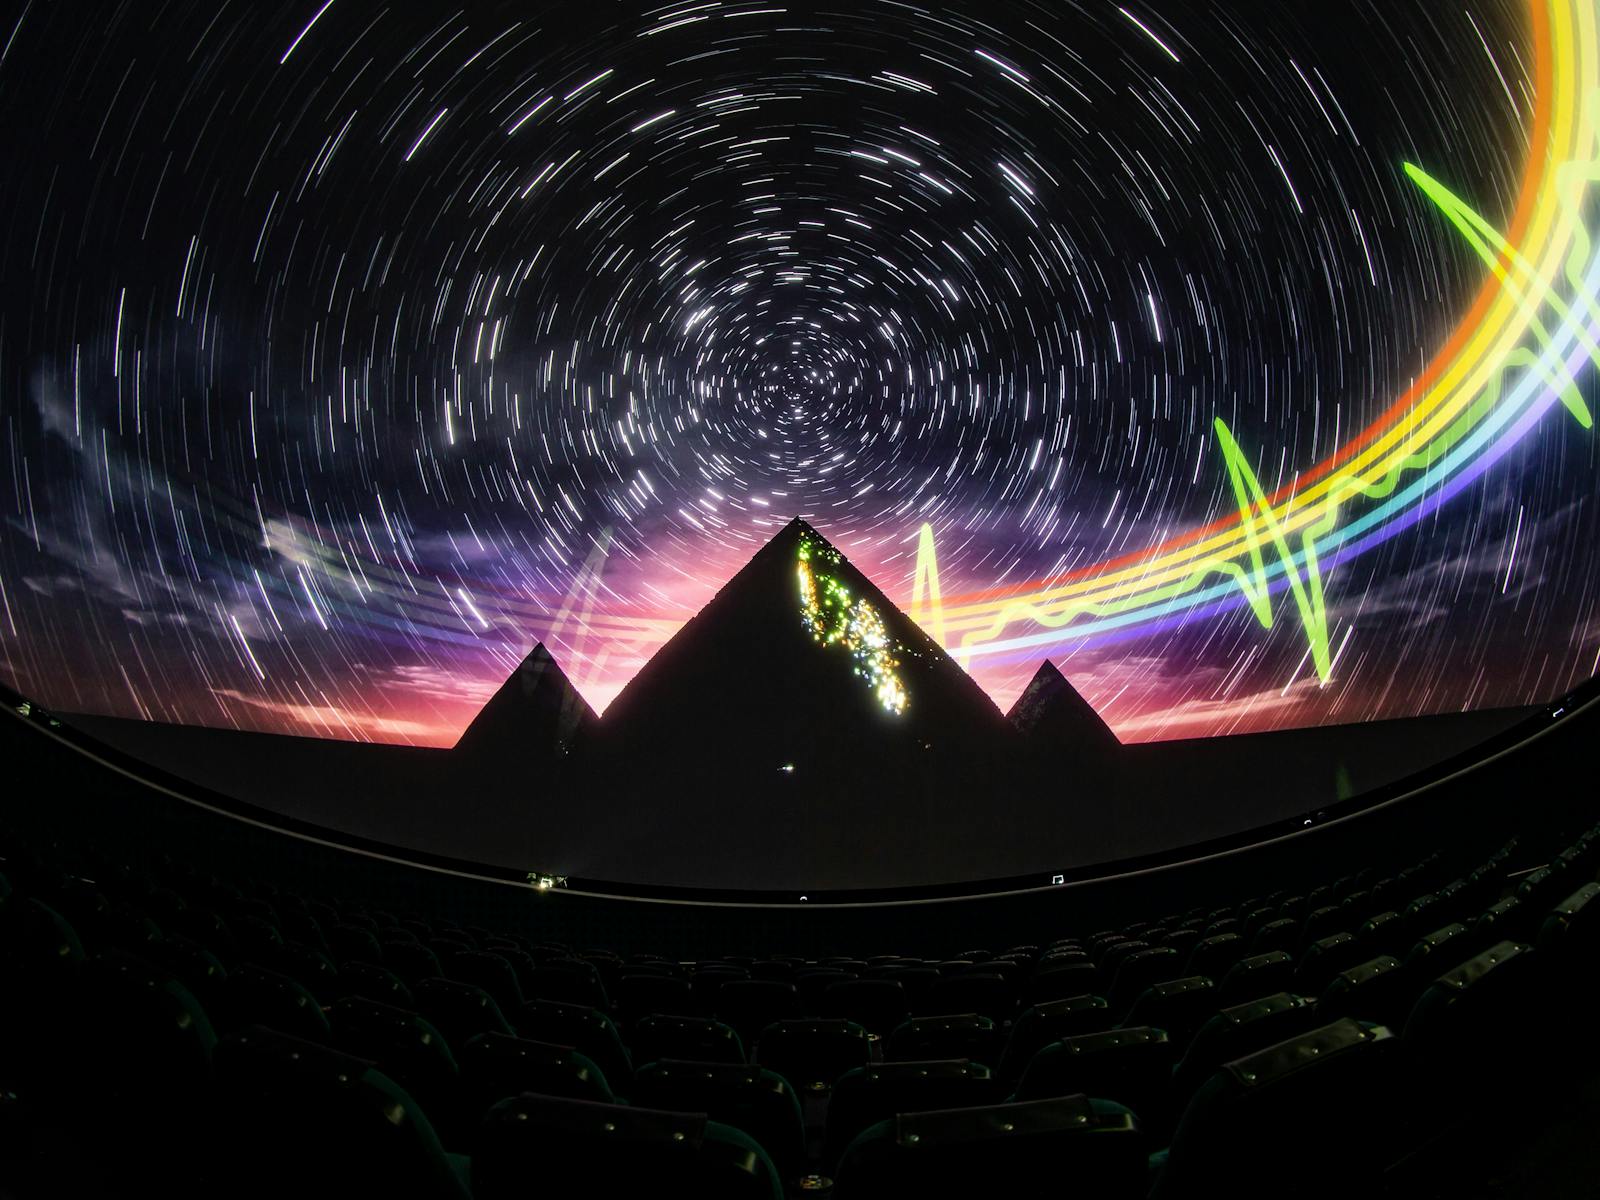 Image from the Dark Side of the Moon planetarium show, depicting the pyramids.